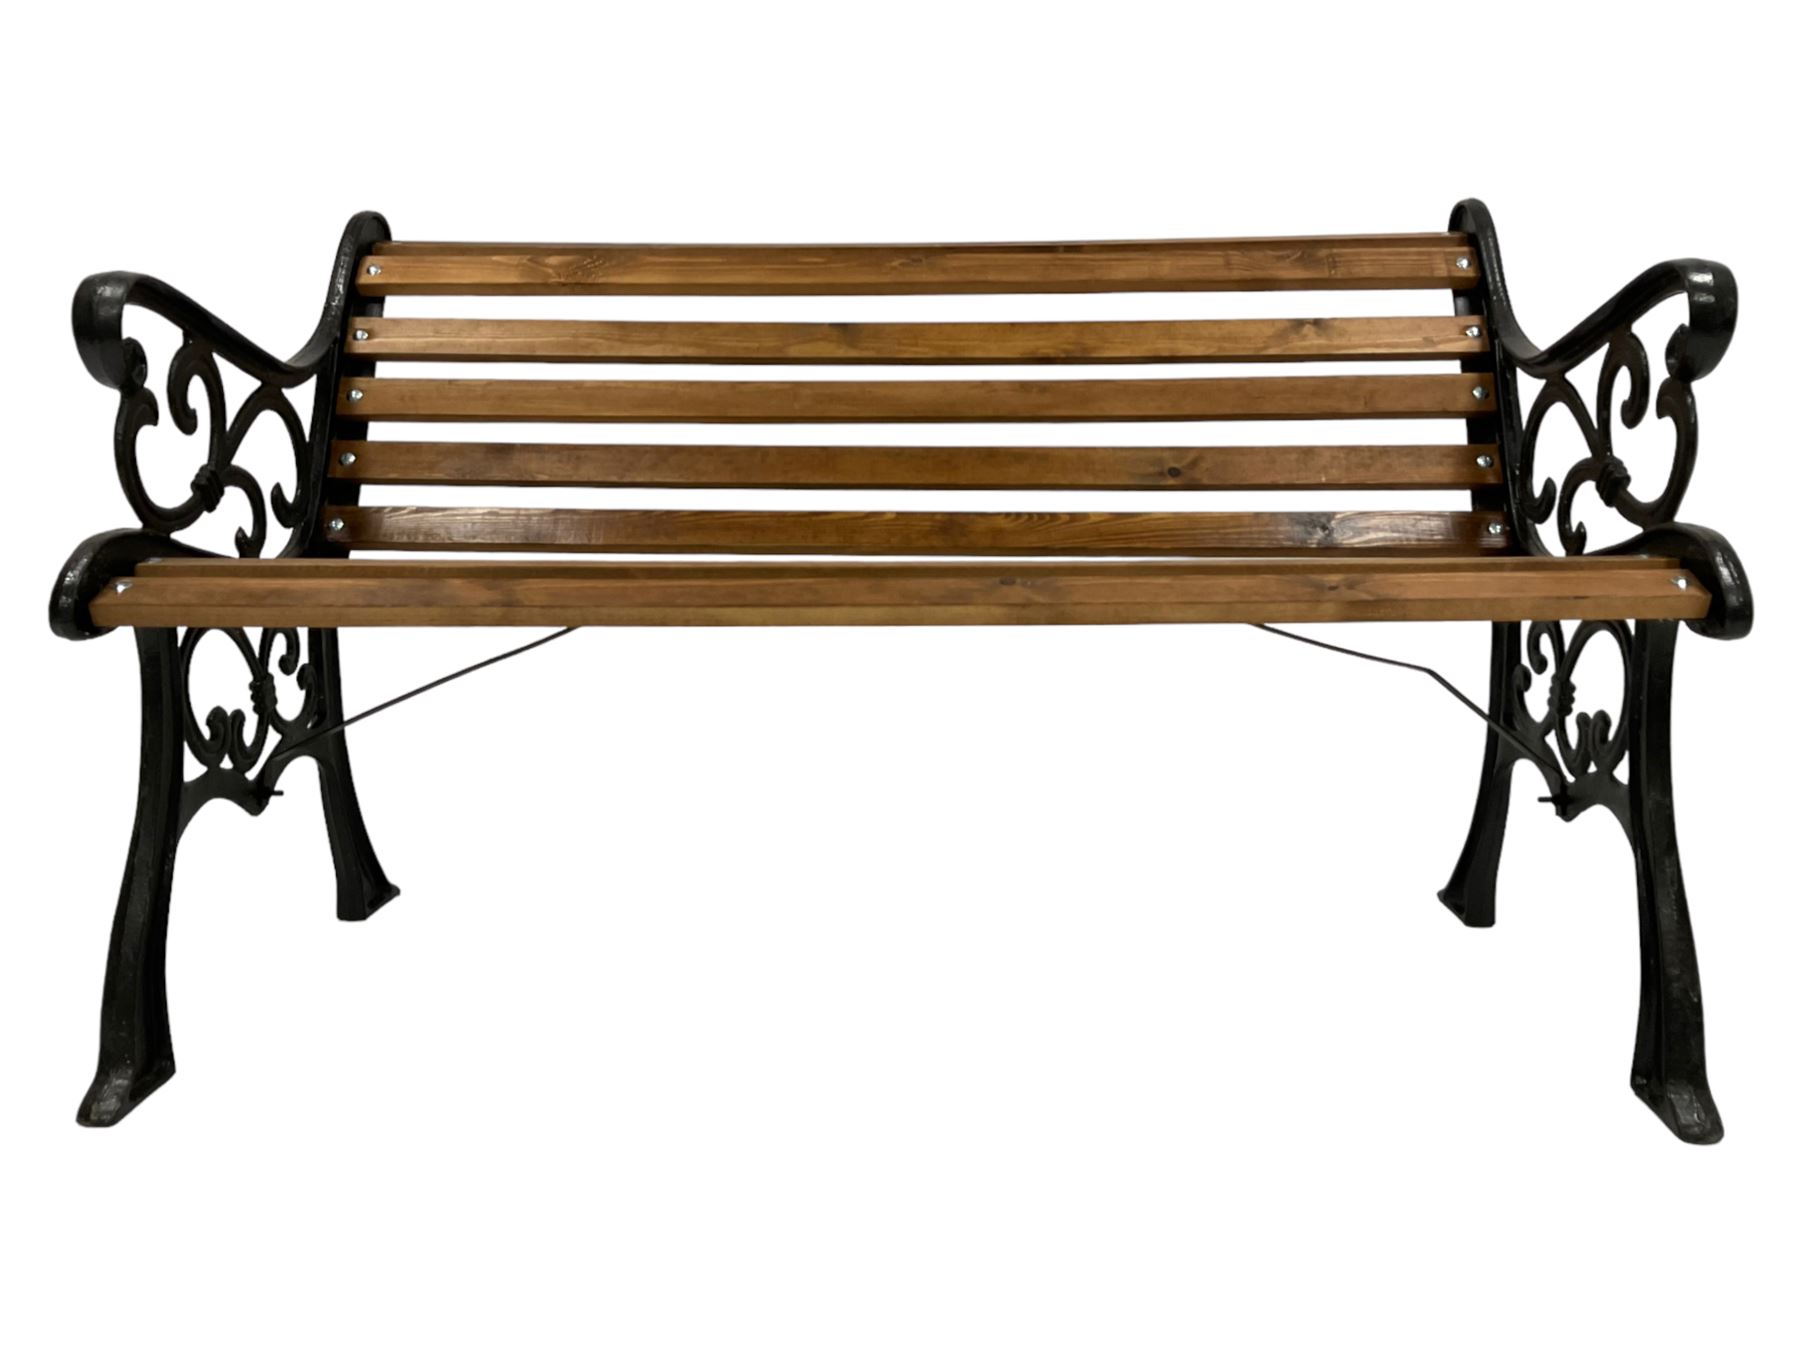 Black painted cast iron and wood slated garden bench - Image 4 of 4